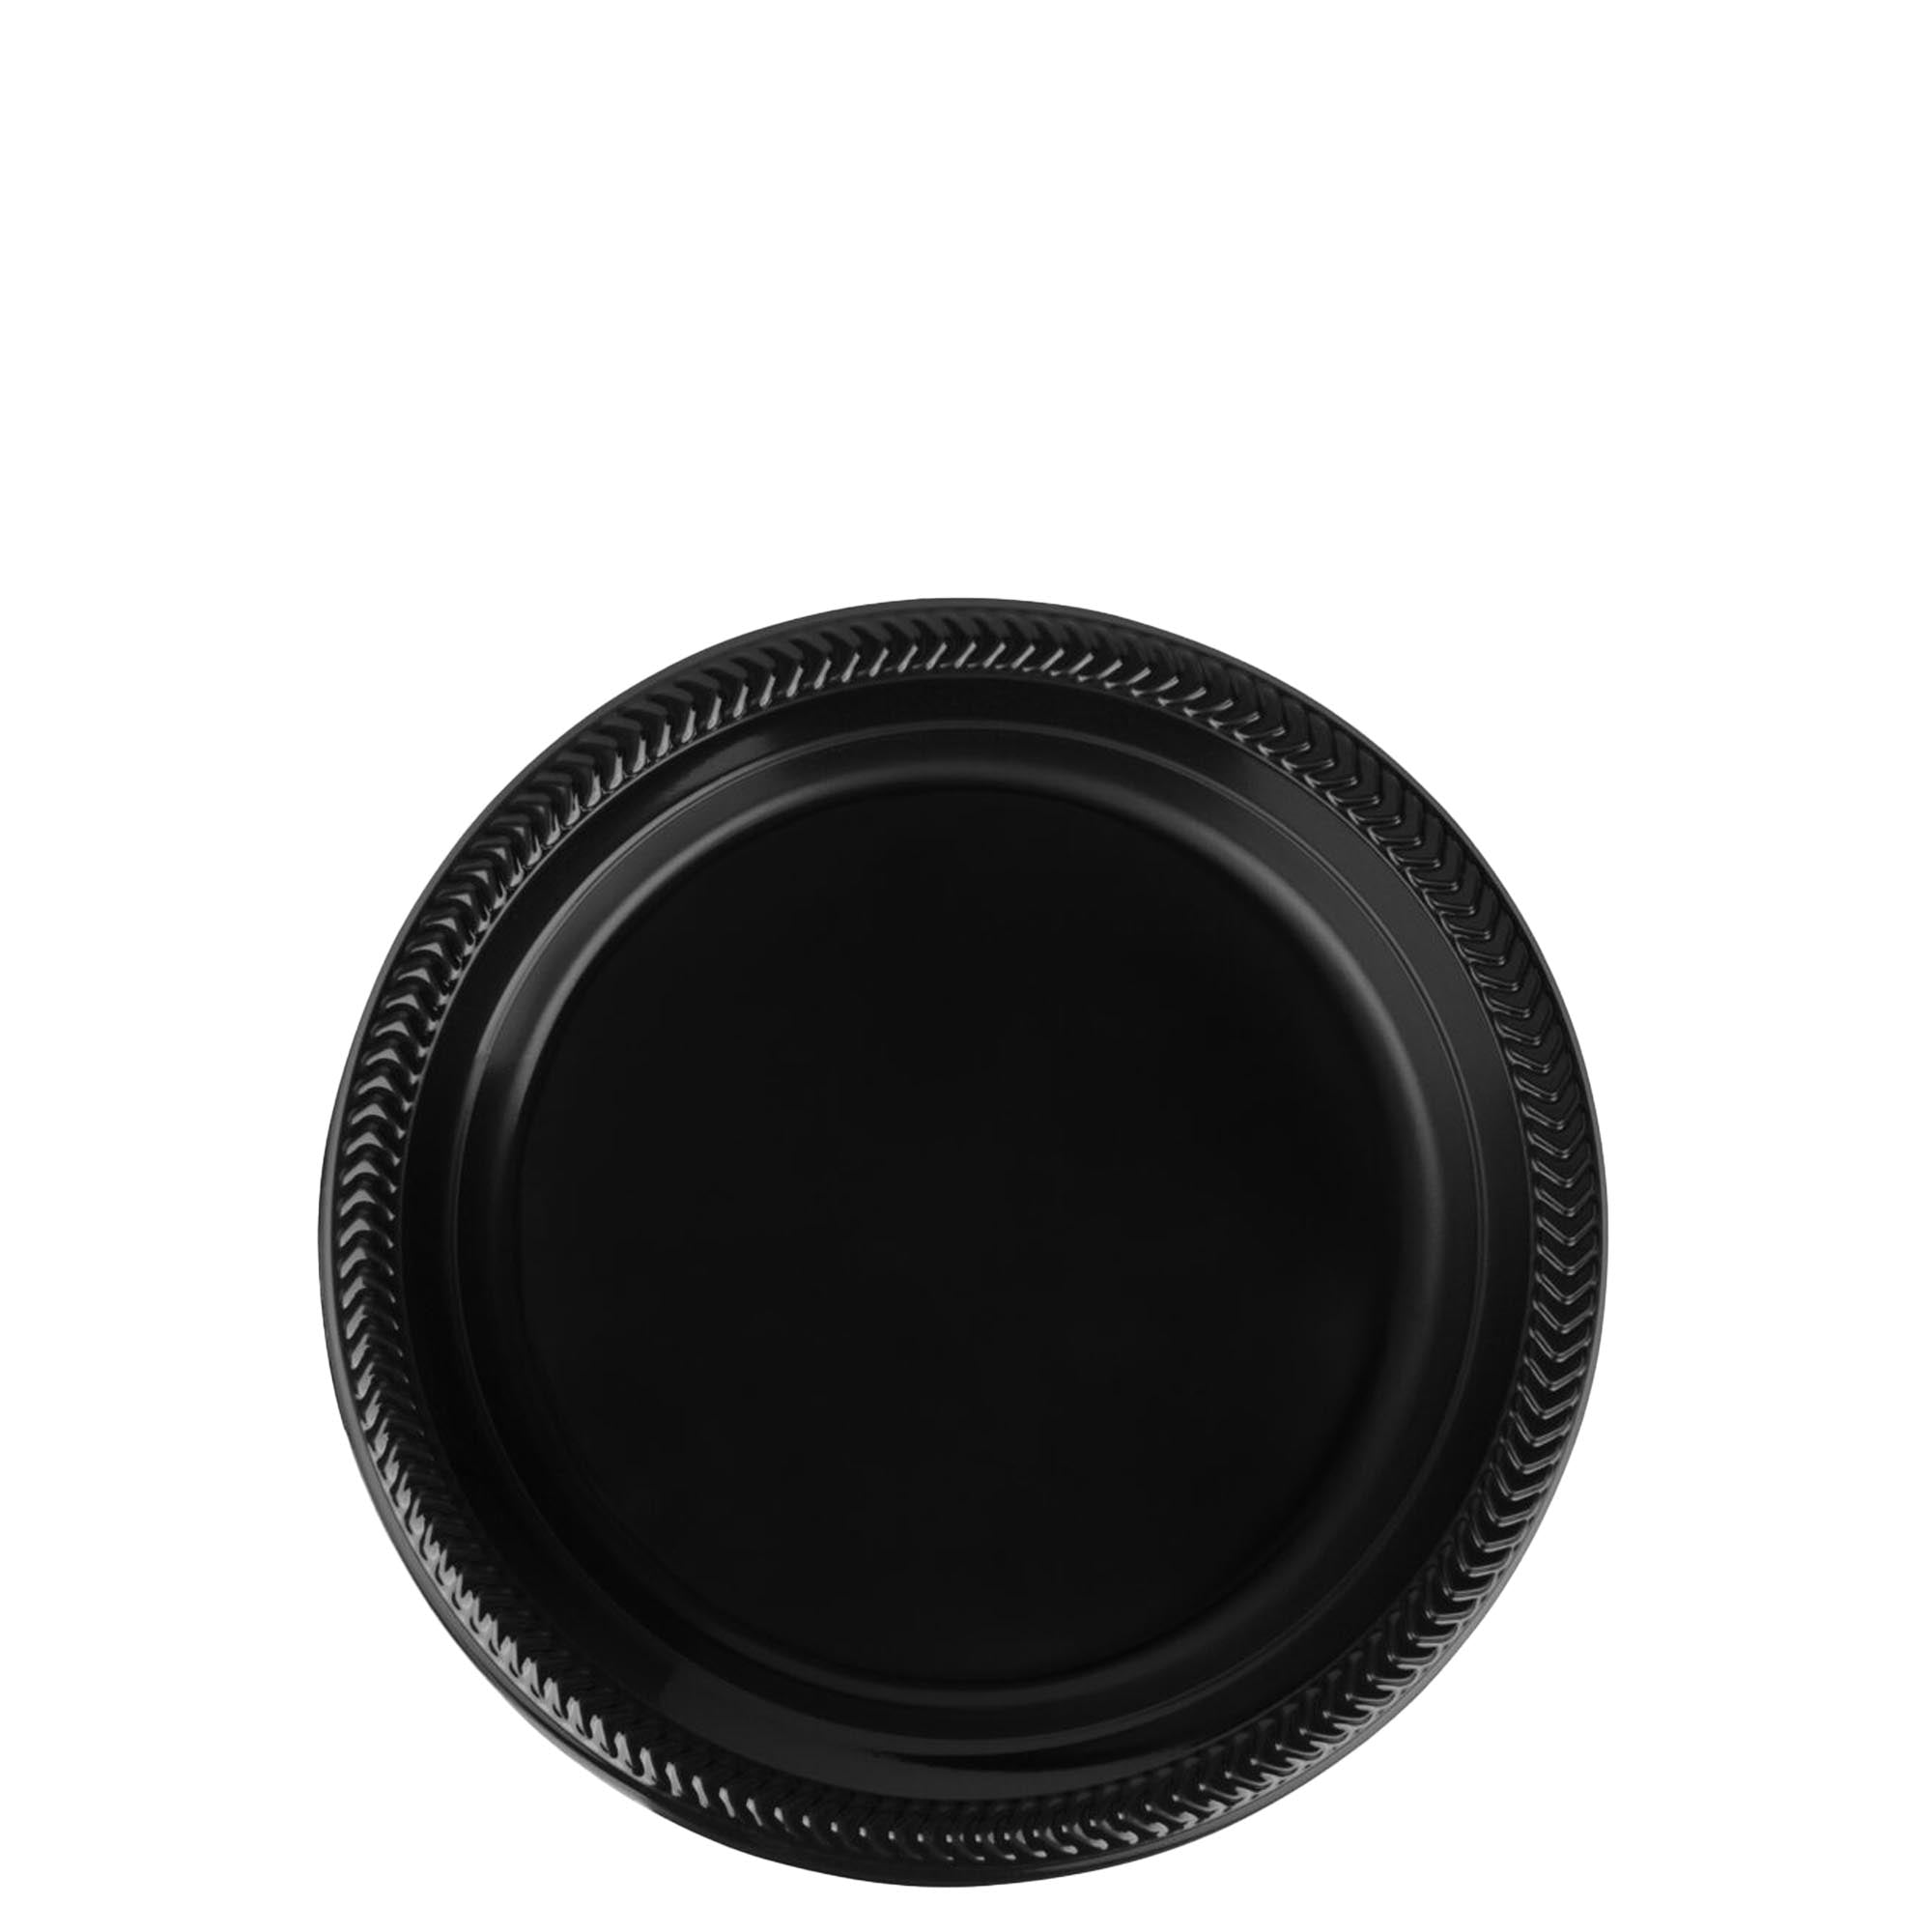 Stack of premium quality black dinner plates made of plastic, 9-inch plastic disposable cuisine black dinner plates, Black dinner plates suitable for all occasions